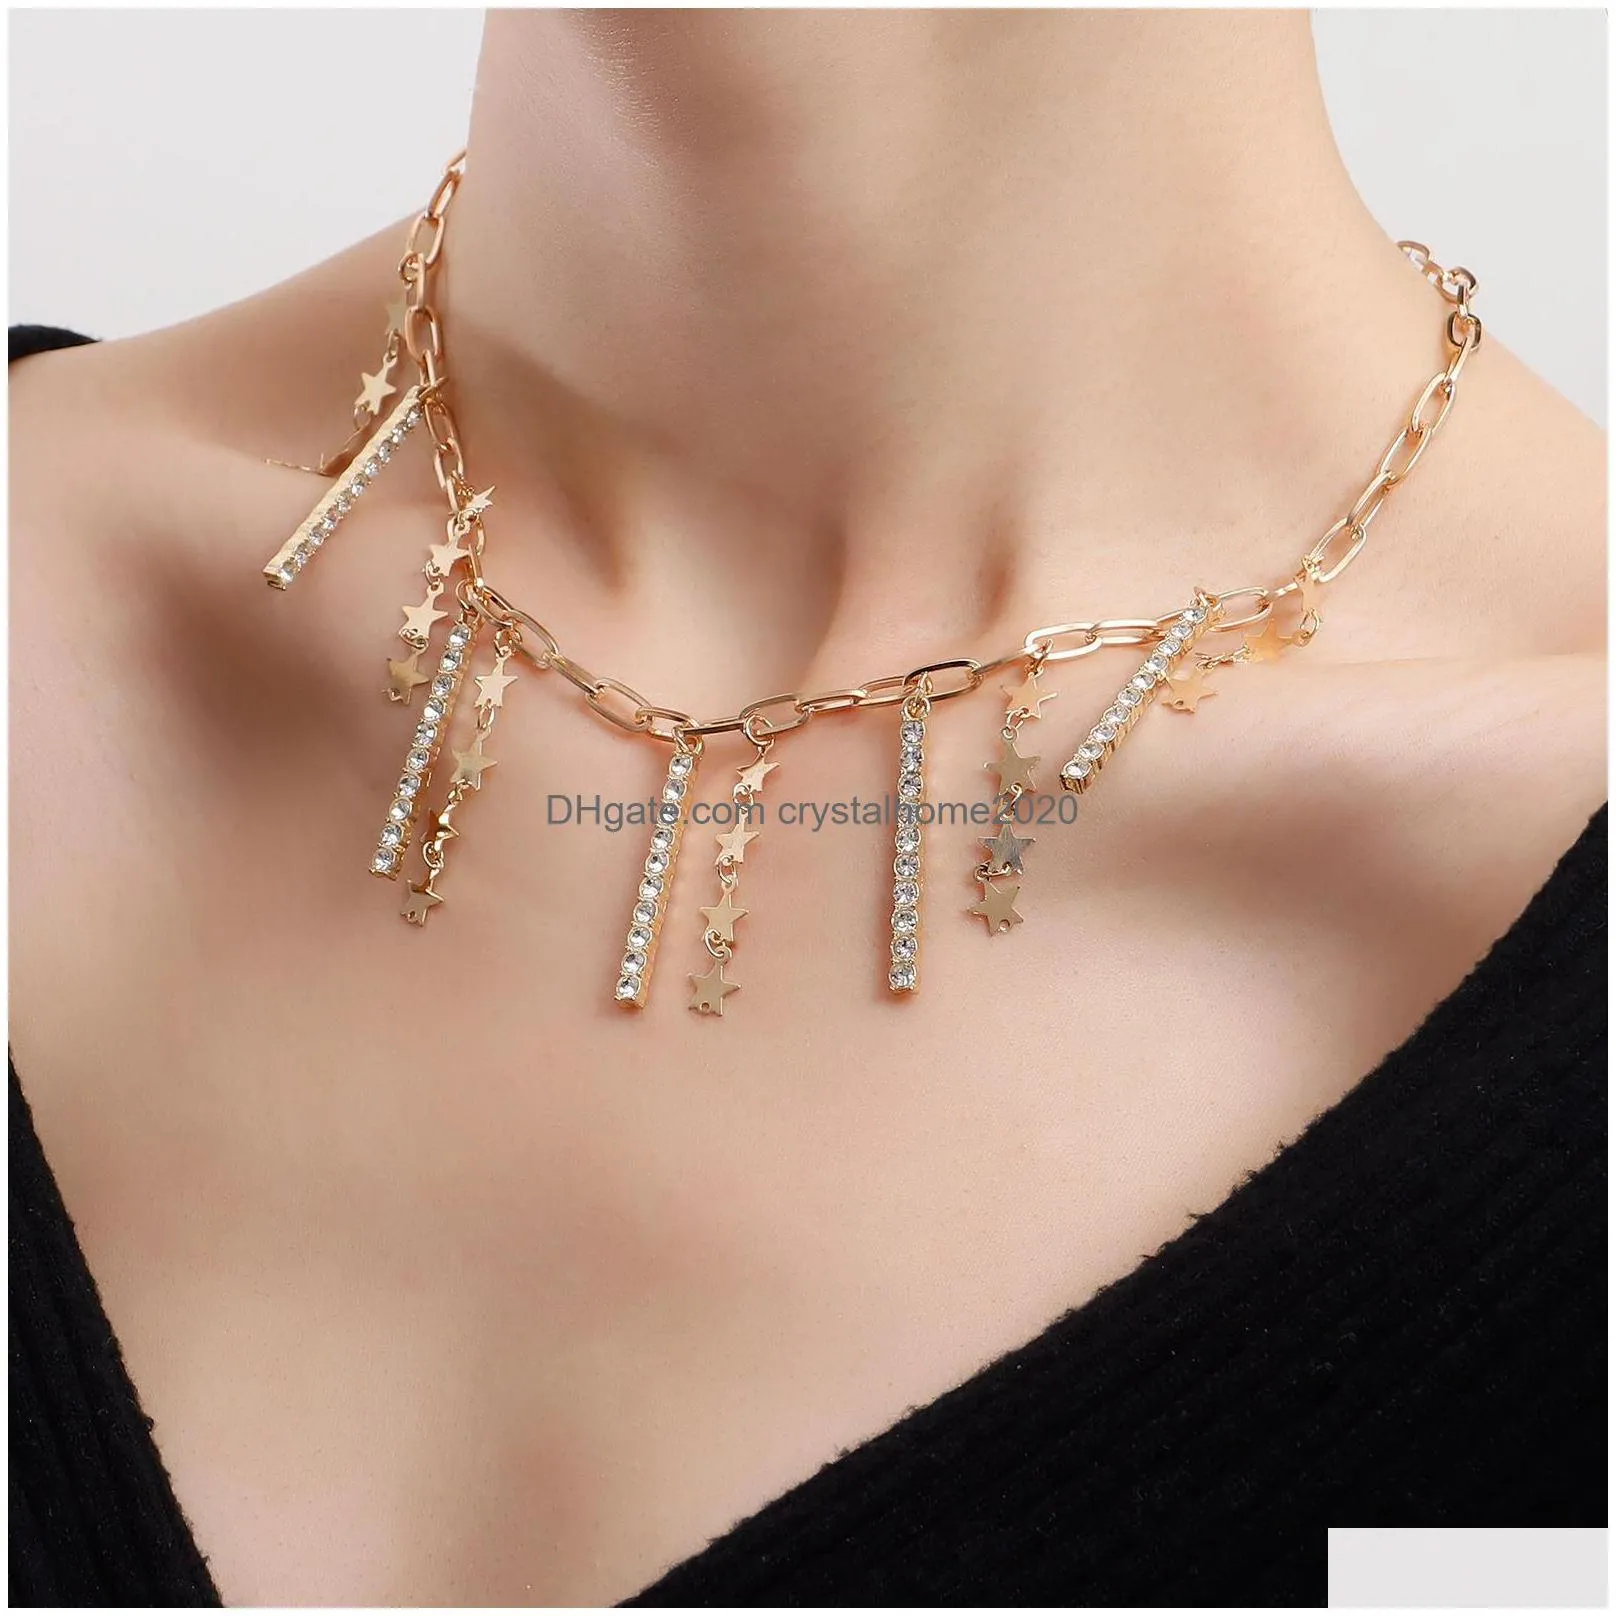 Pendant Necklaces Niche Design Tzitzit Five-Pointed Star Diamond-Encrusted Metal Rod Necklace Autumn And Winter Sweater Pendant High-G Dhhd0